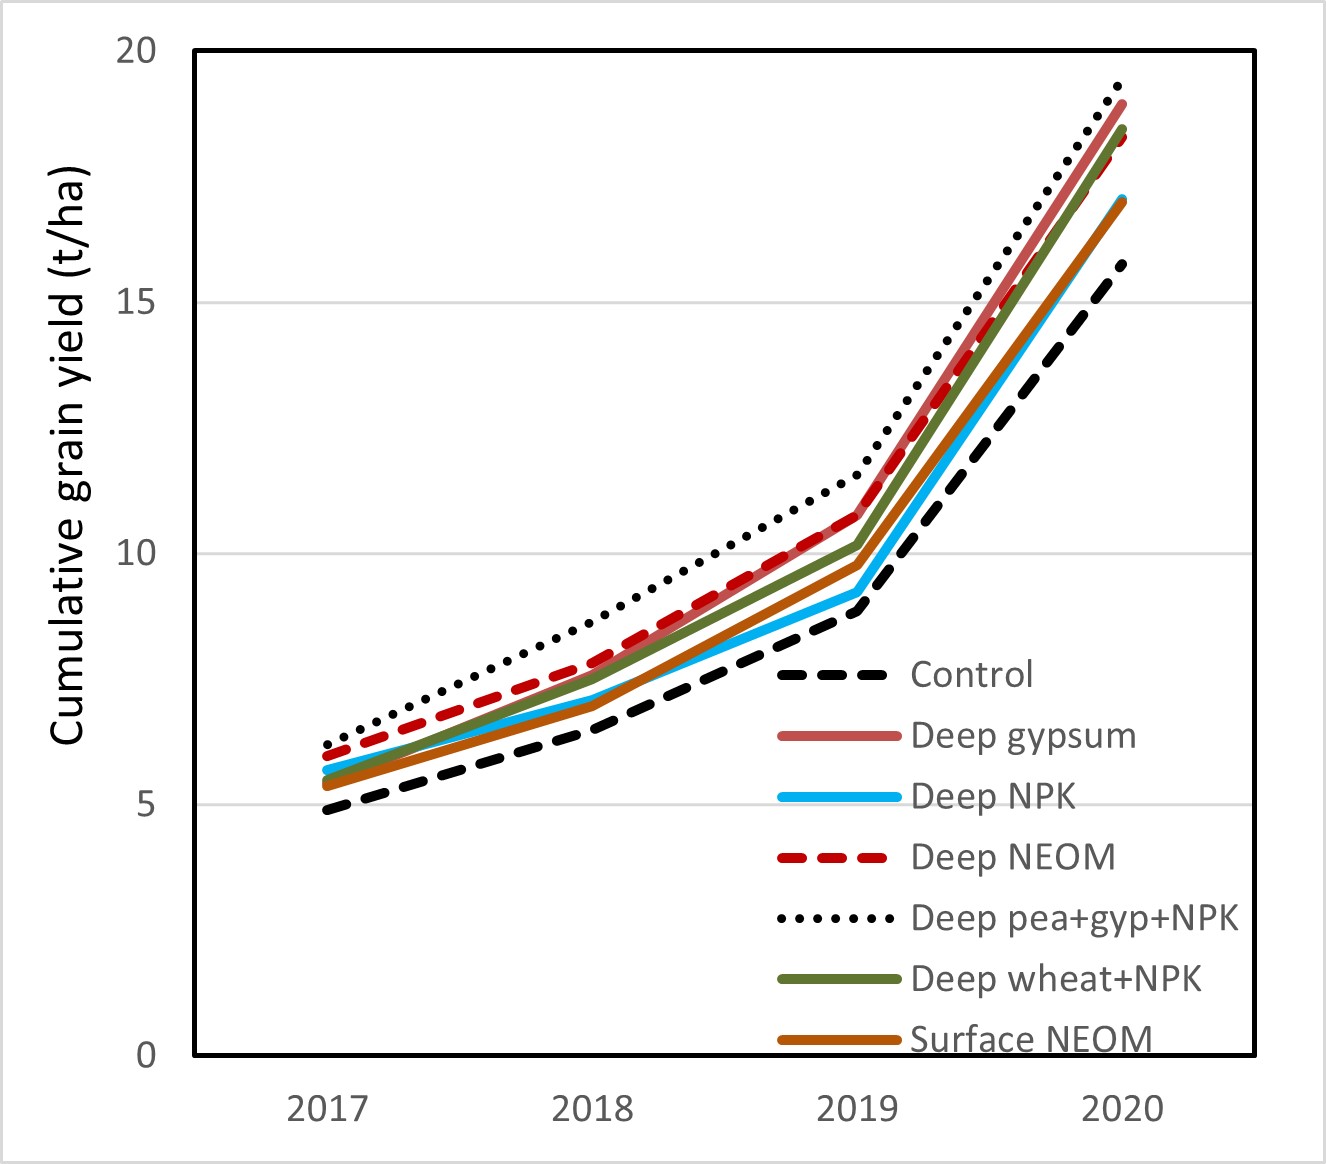 Figure 3. Cumulative grain yield responses to selected amendment treatments at Rand for 2017 (barley), 2018 (wheat), 2019 (canola) and 2020 (wheat).